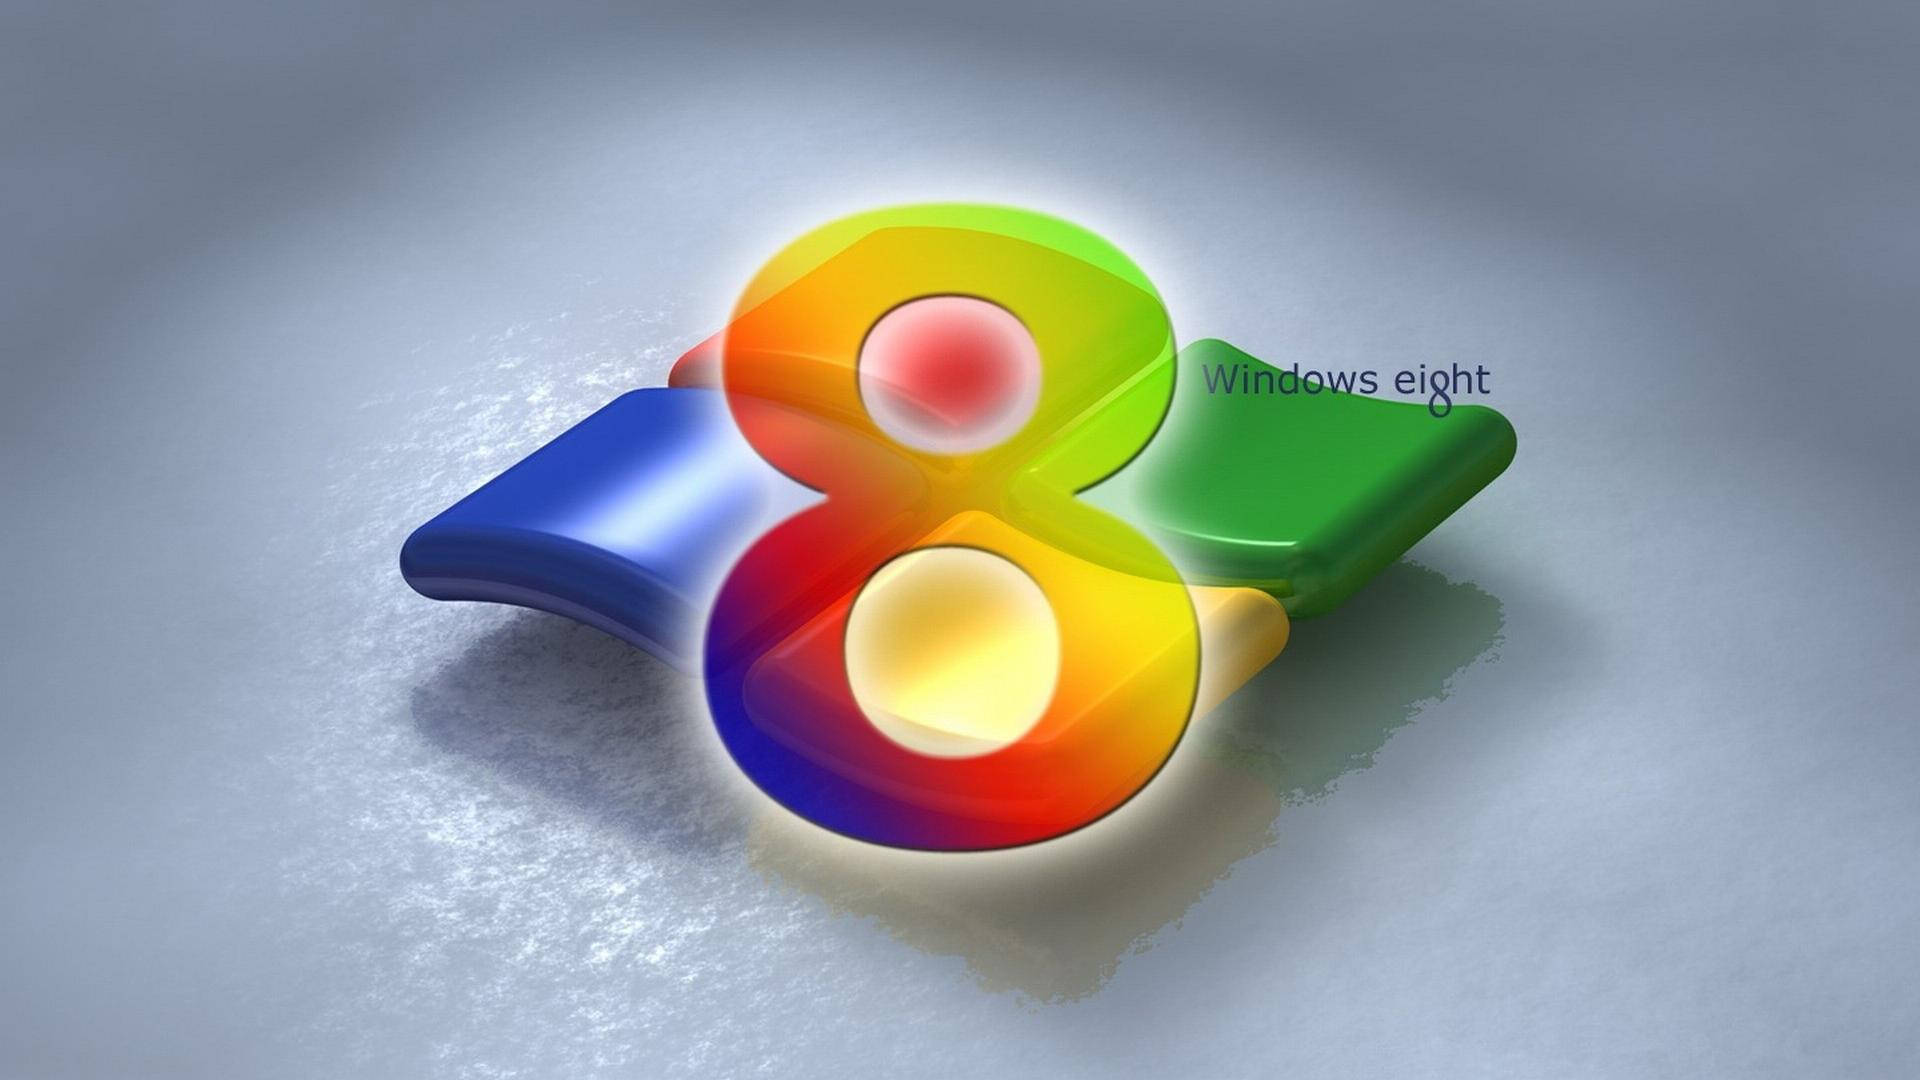 Colorful Windows 8 Logo And Number Wallpaper